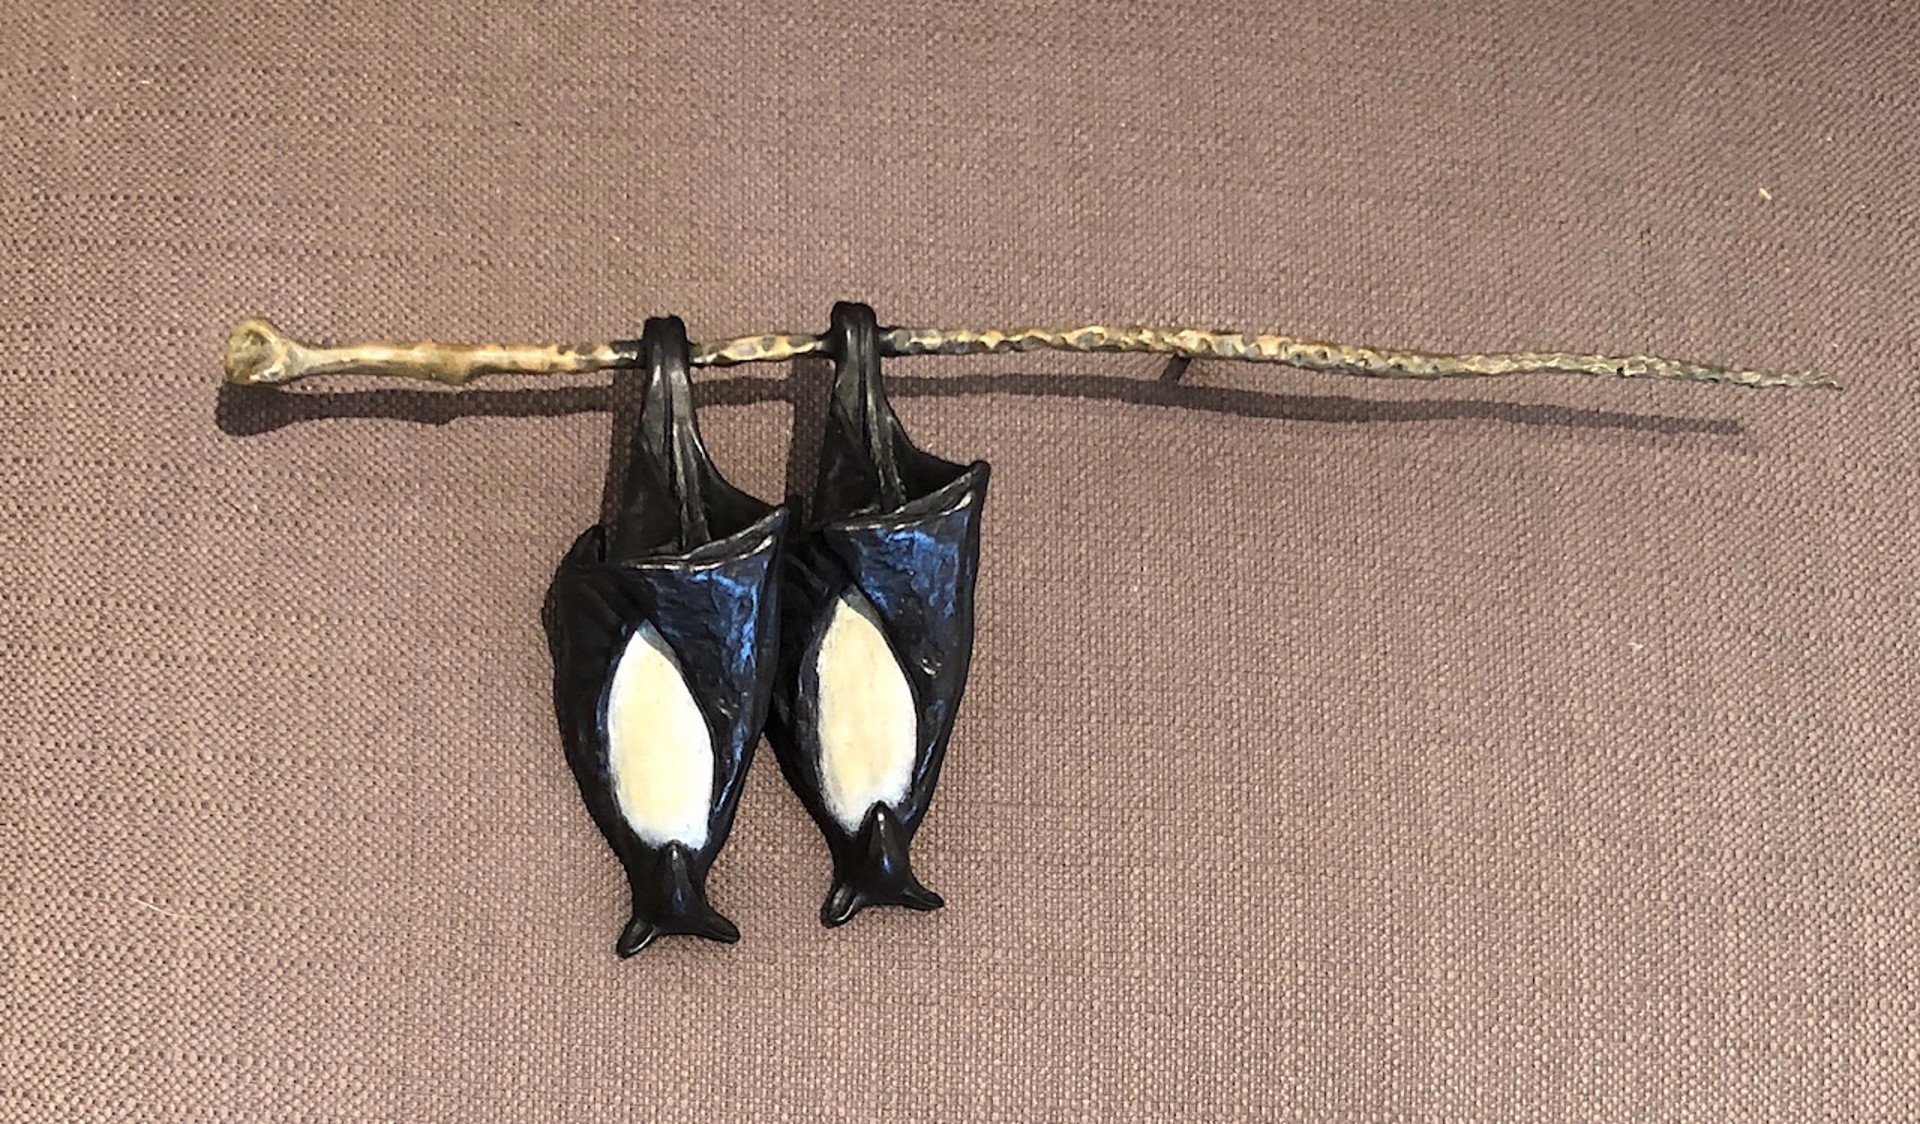 2 Temple Bats on a Branch, hangs from the left by Copper Tritscheller